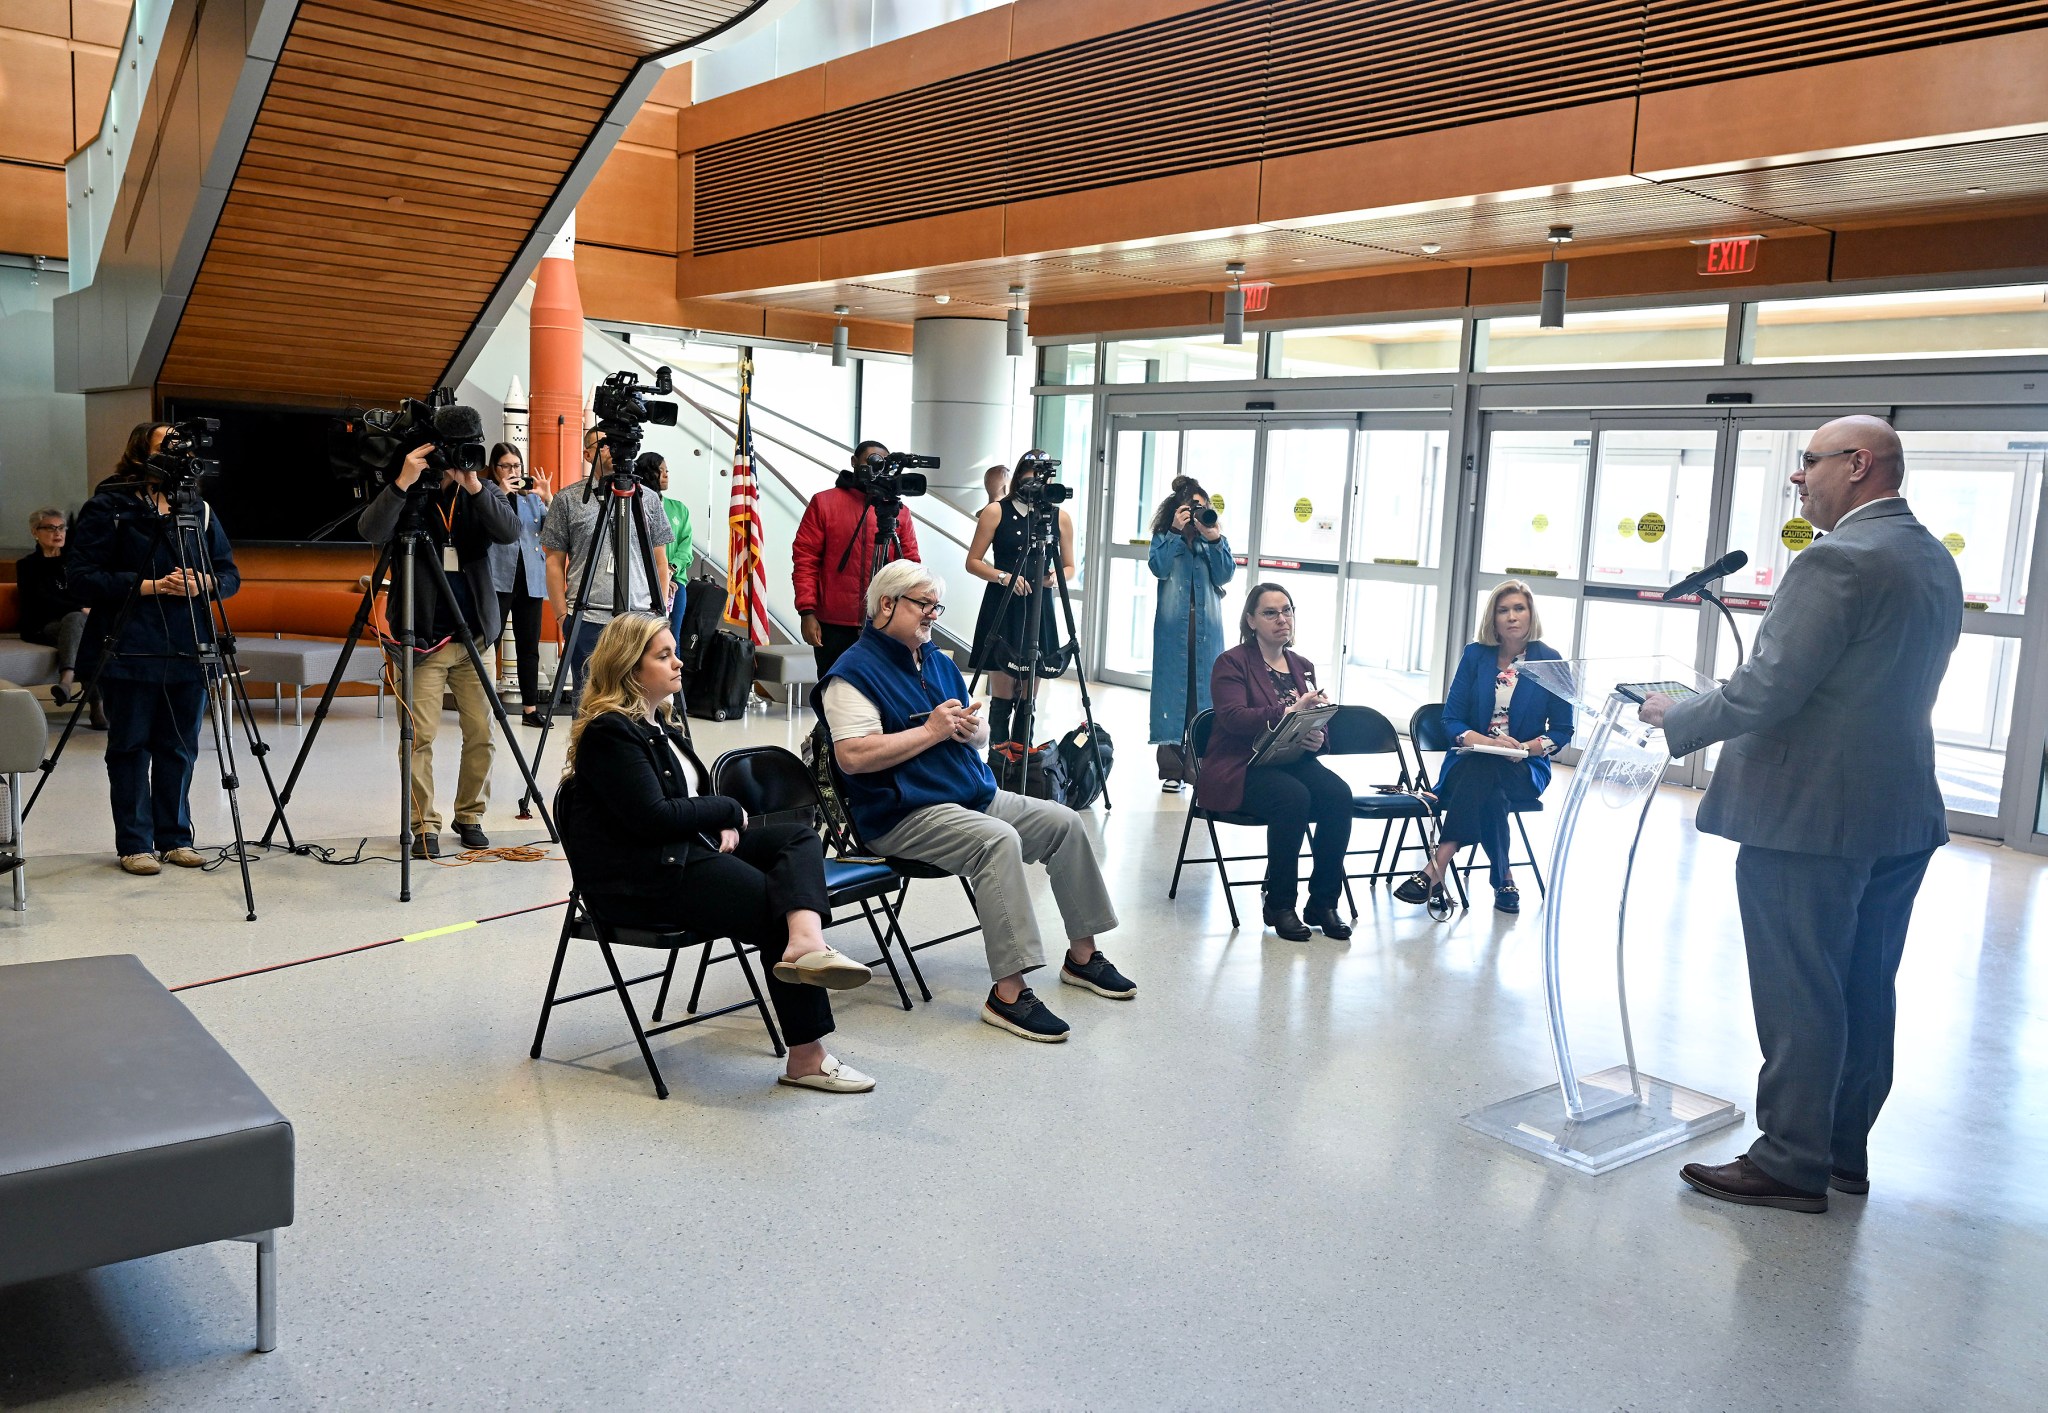 Marshall Center Director Joseph Pelfrey, far right, talks to reporters during his first media event since accepting the director position. The event was held Feb. 15 in the lobby of Building 4221.